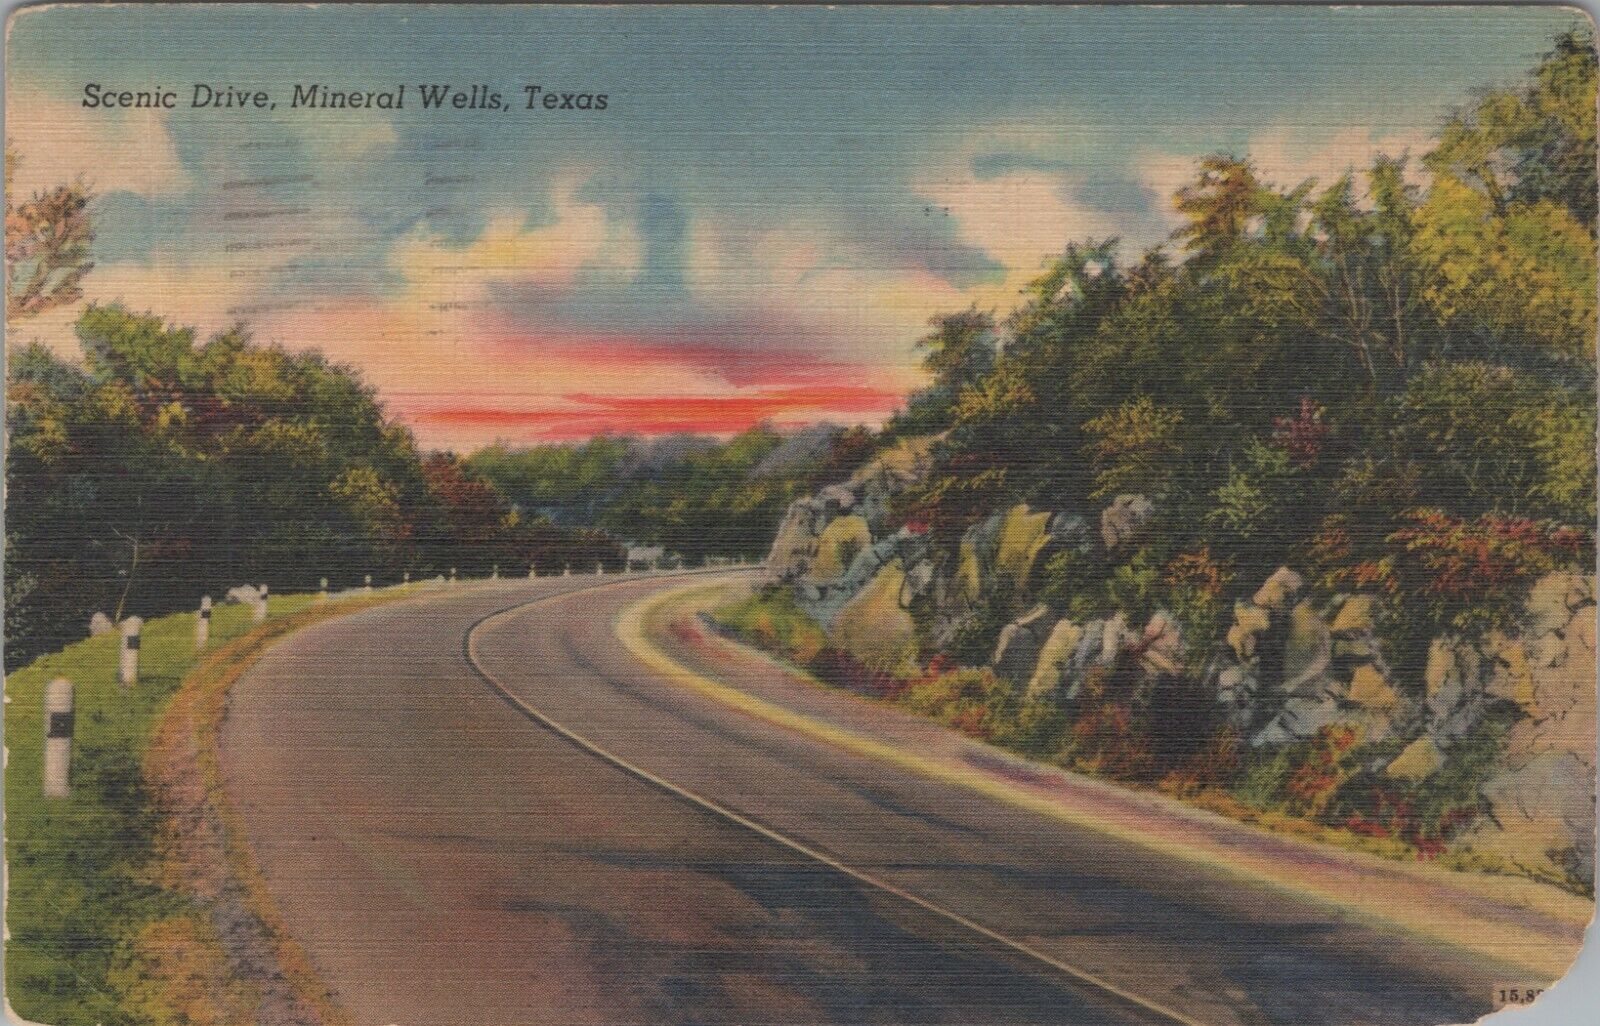 WWII 1944 Mineral Wells Texas scenic drive road linen FREE postage postcard D141